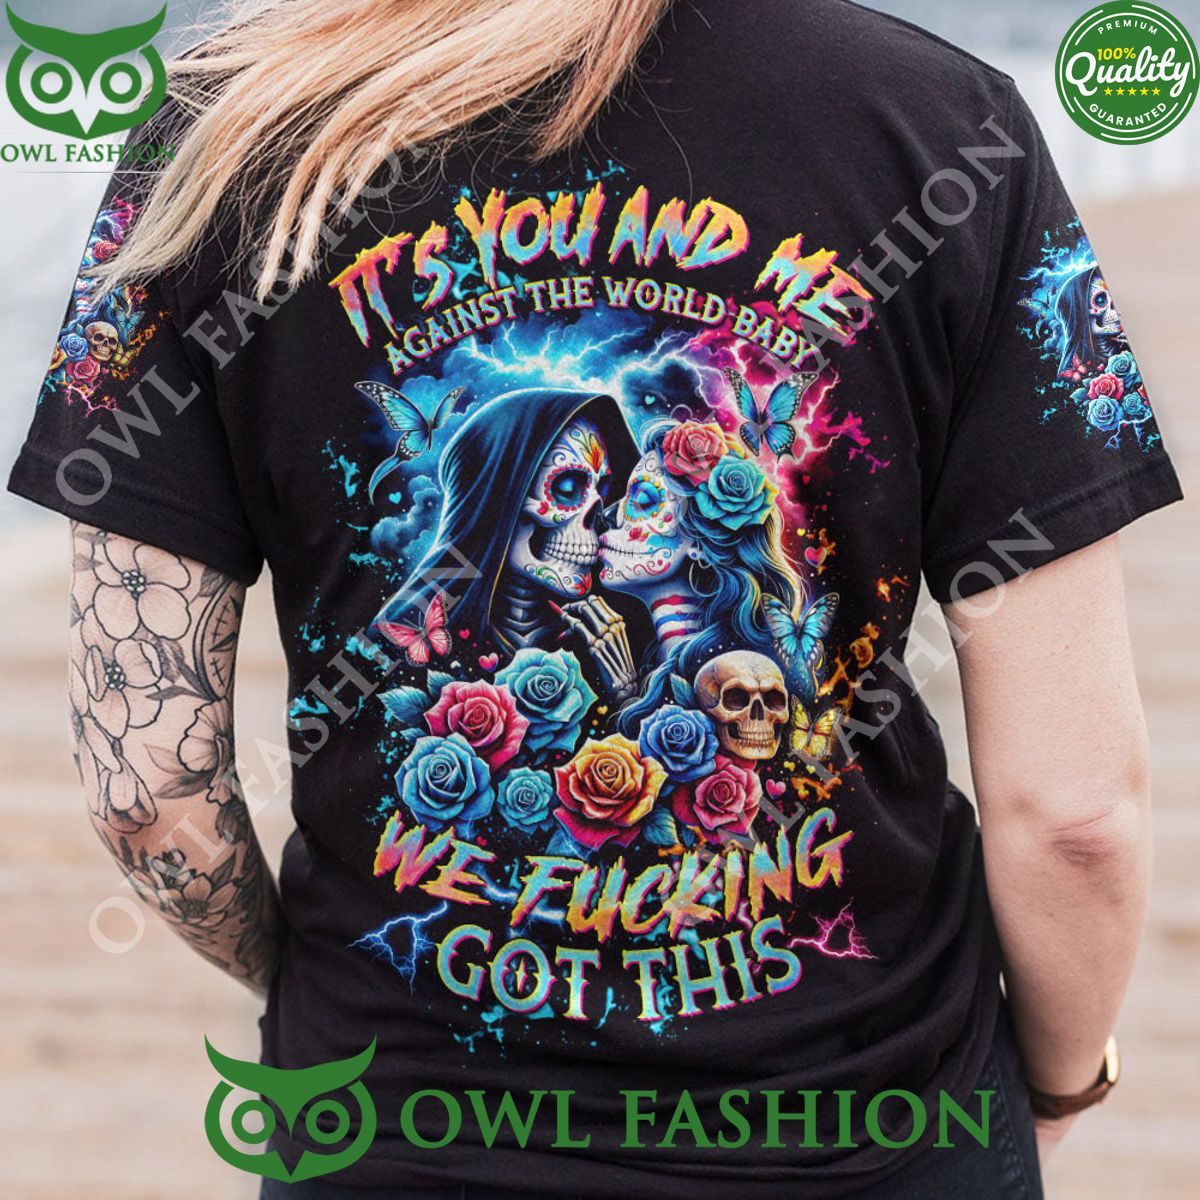 we f got this skull couple you and me against the world baby t shirt 1 hr6QX.jpg